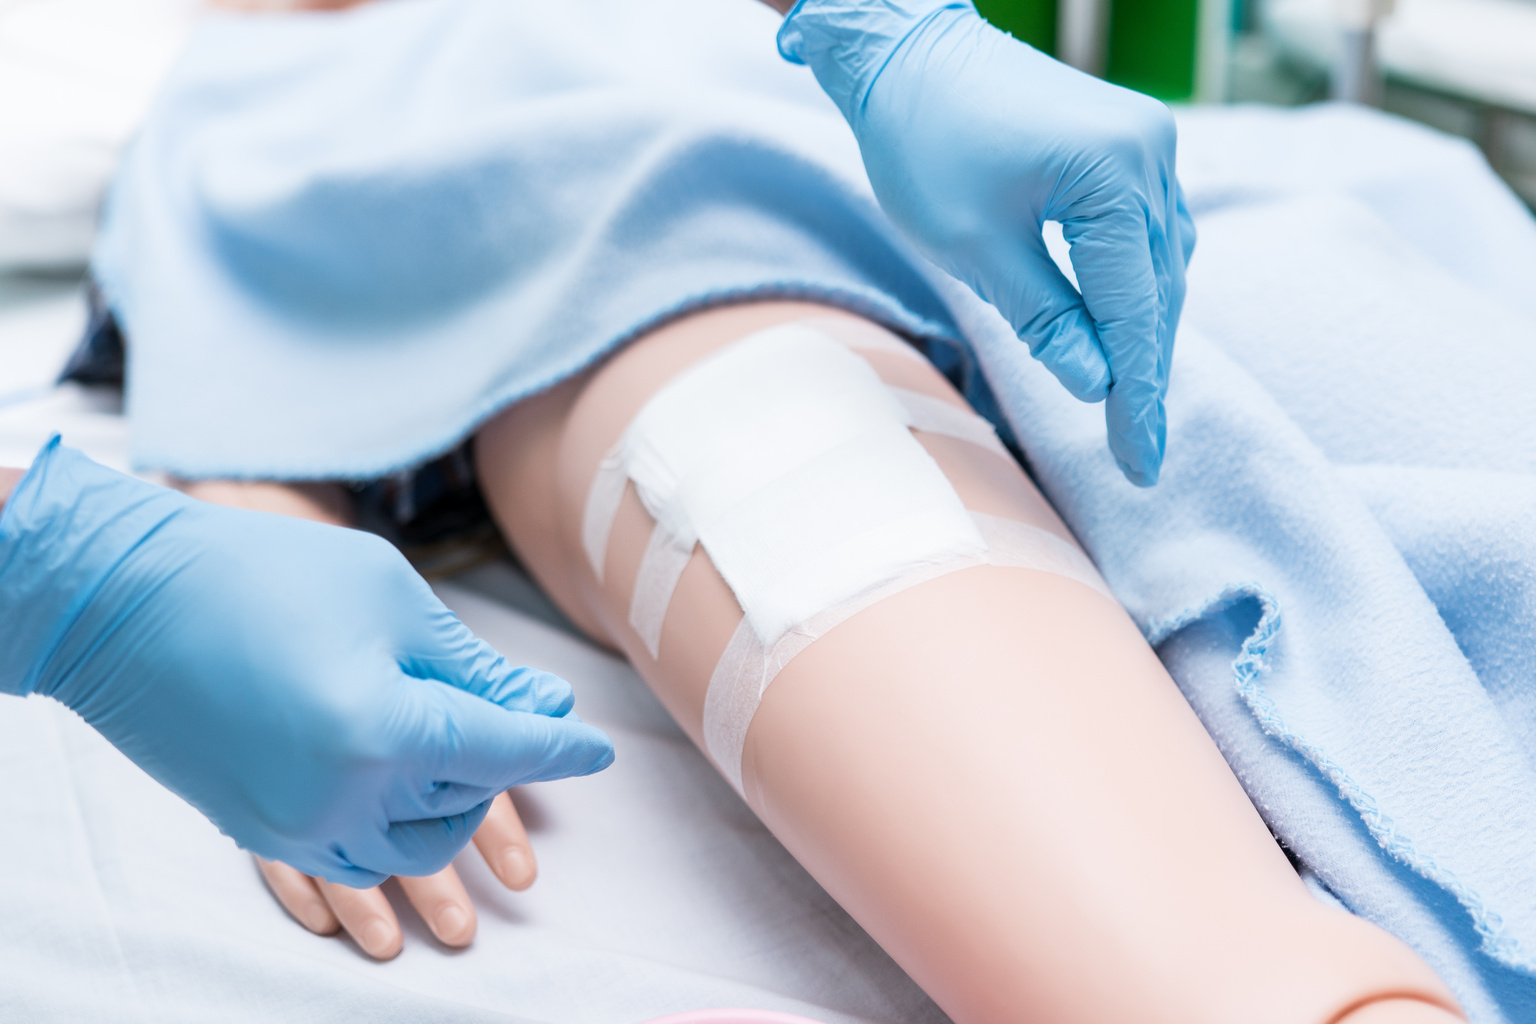 Assessing nurses’ competence with simulated wound care